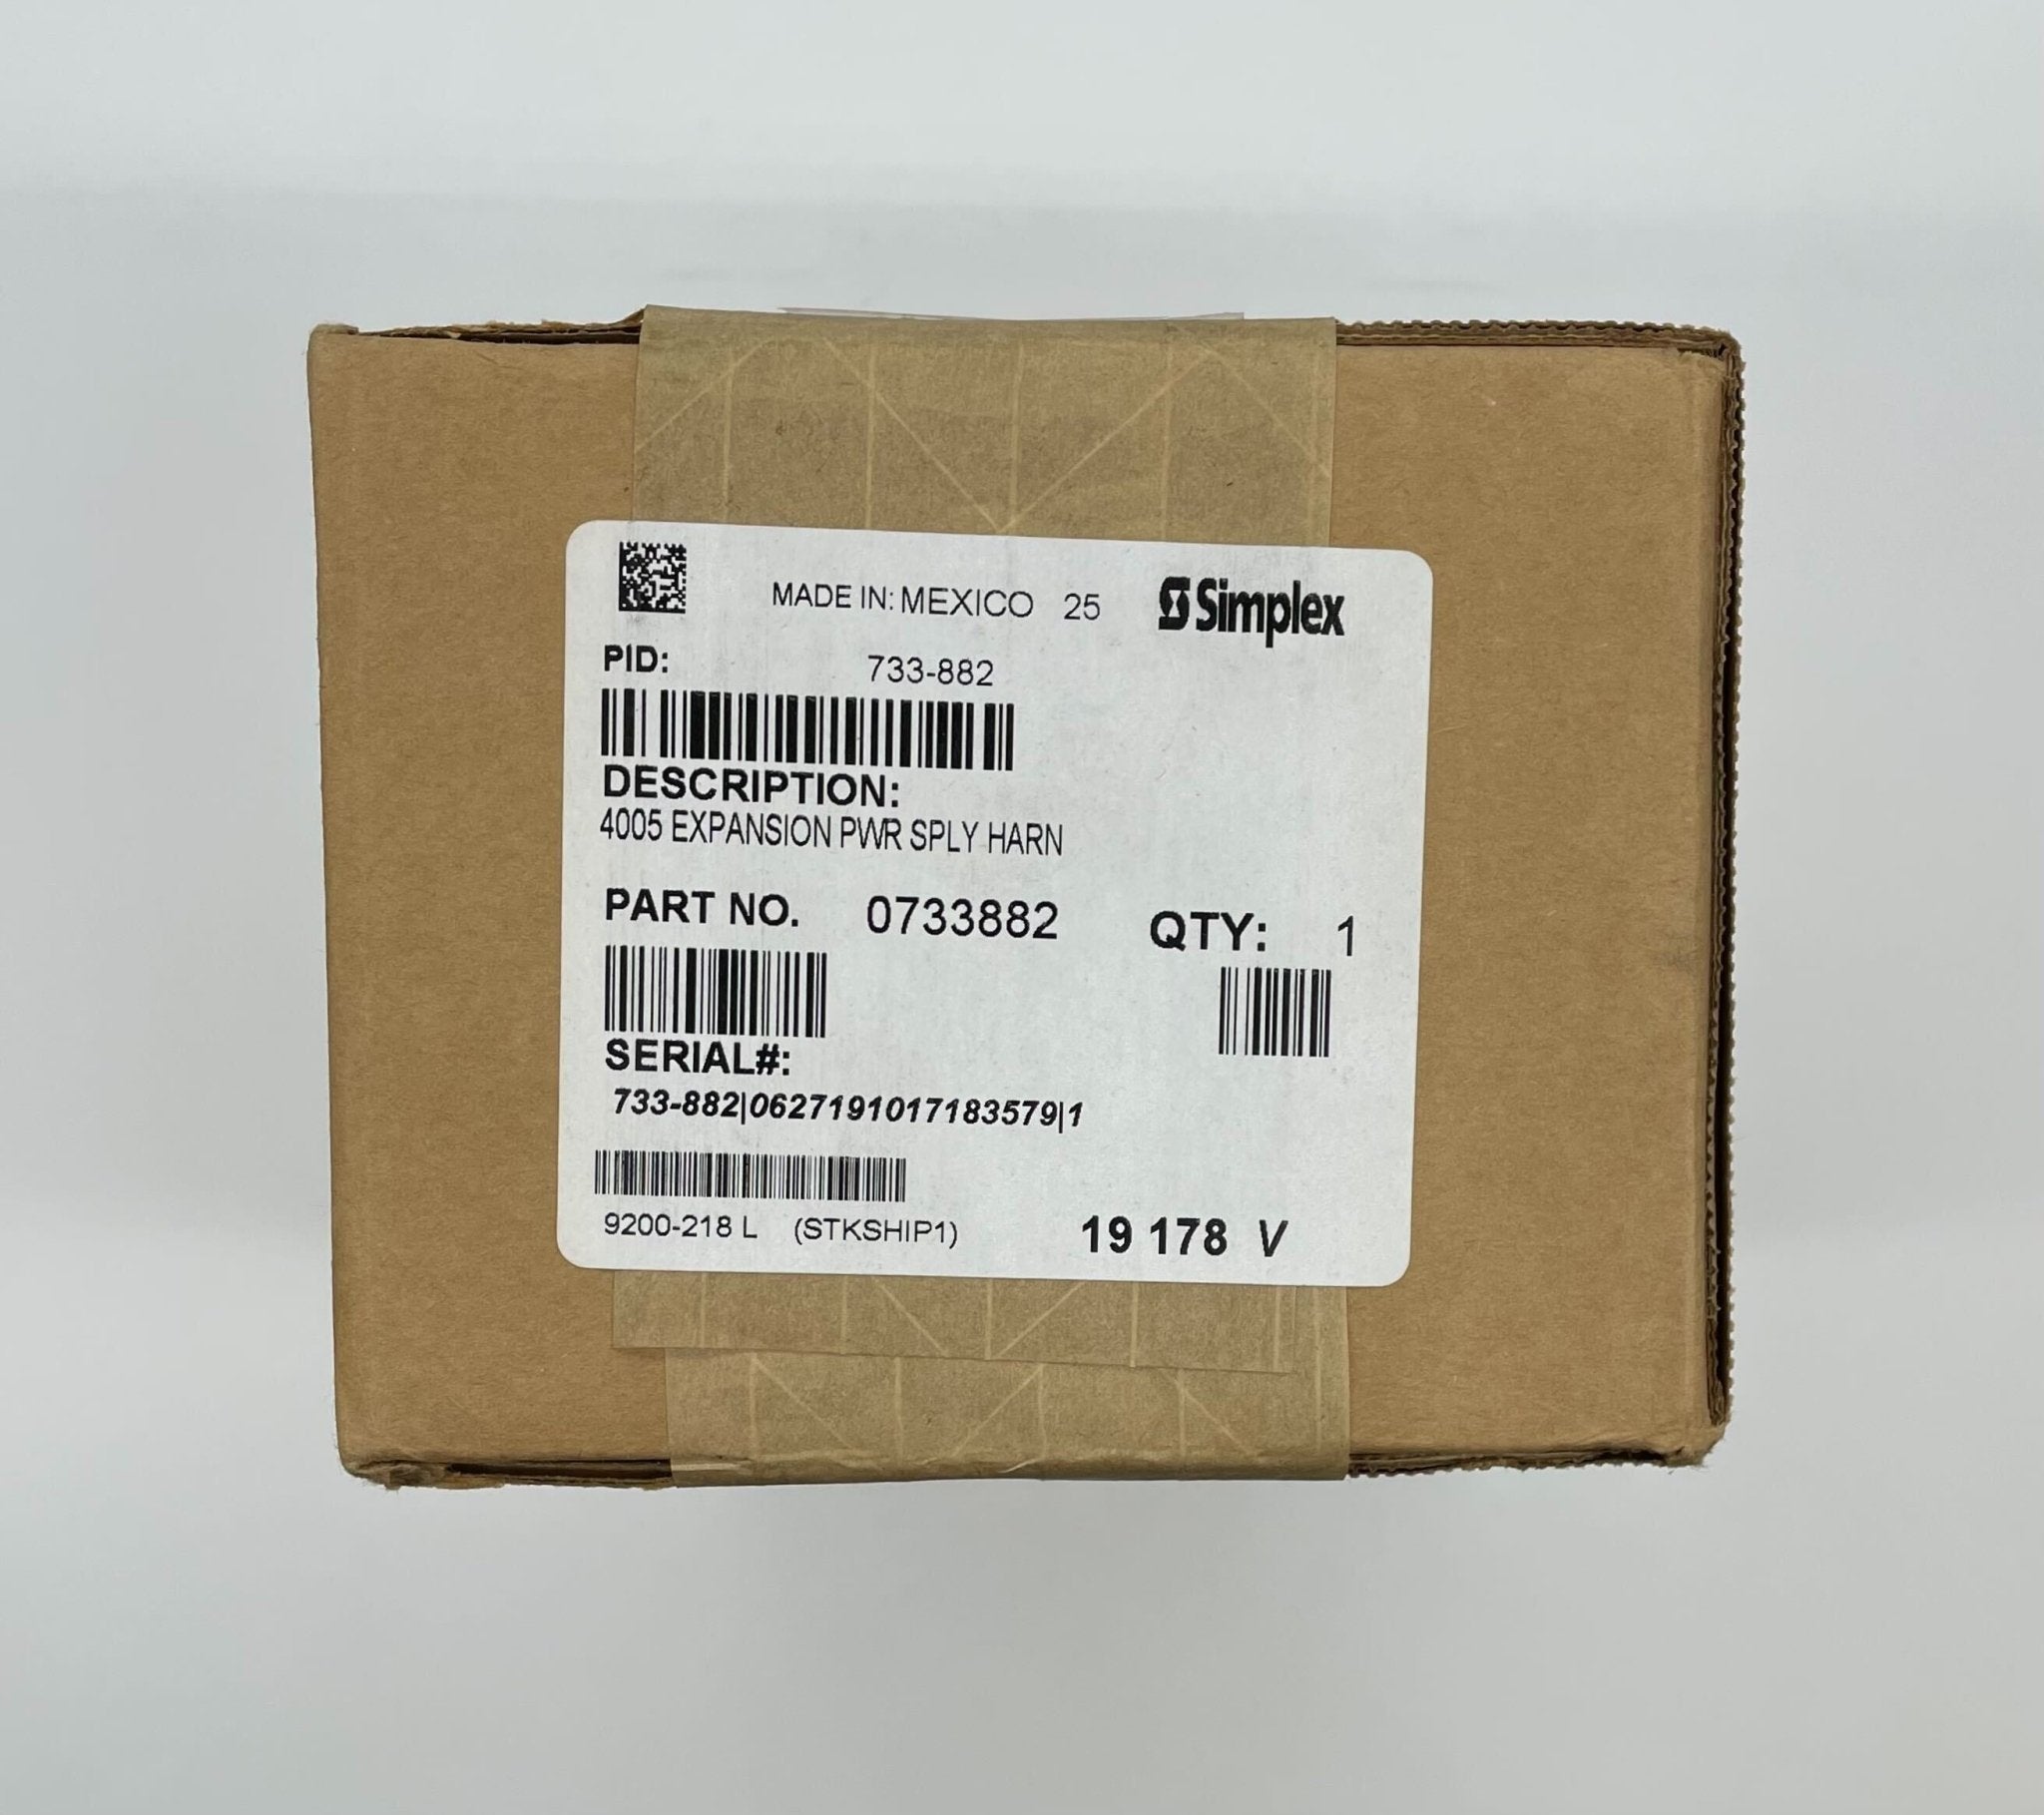 Simplex 733-882 Expansion Power Supply Harness - The Fire Alarm Supplier